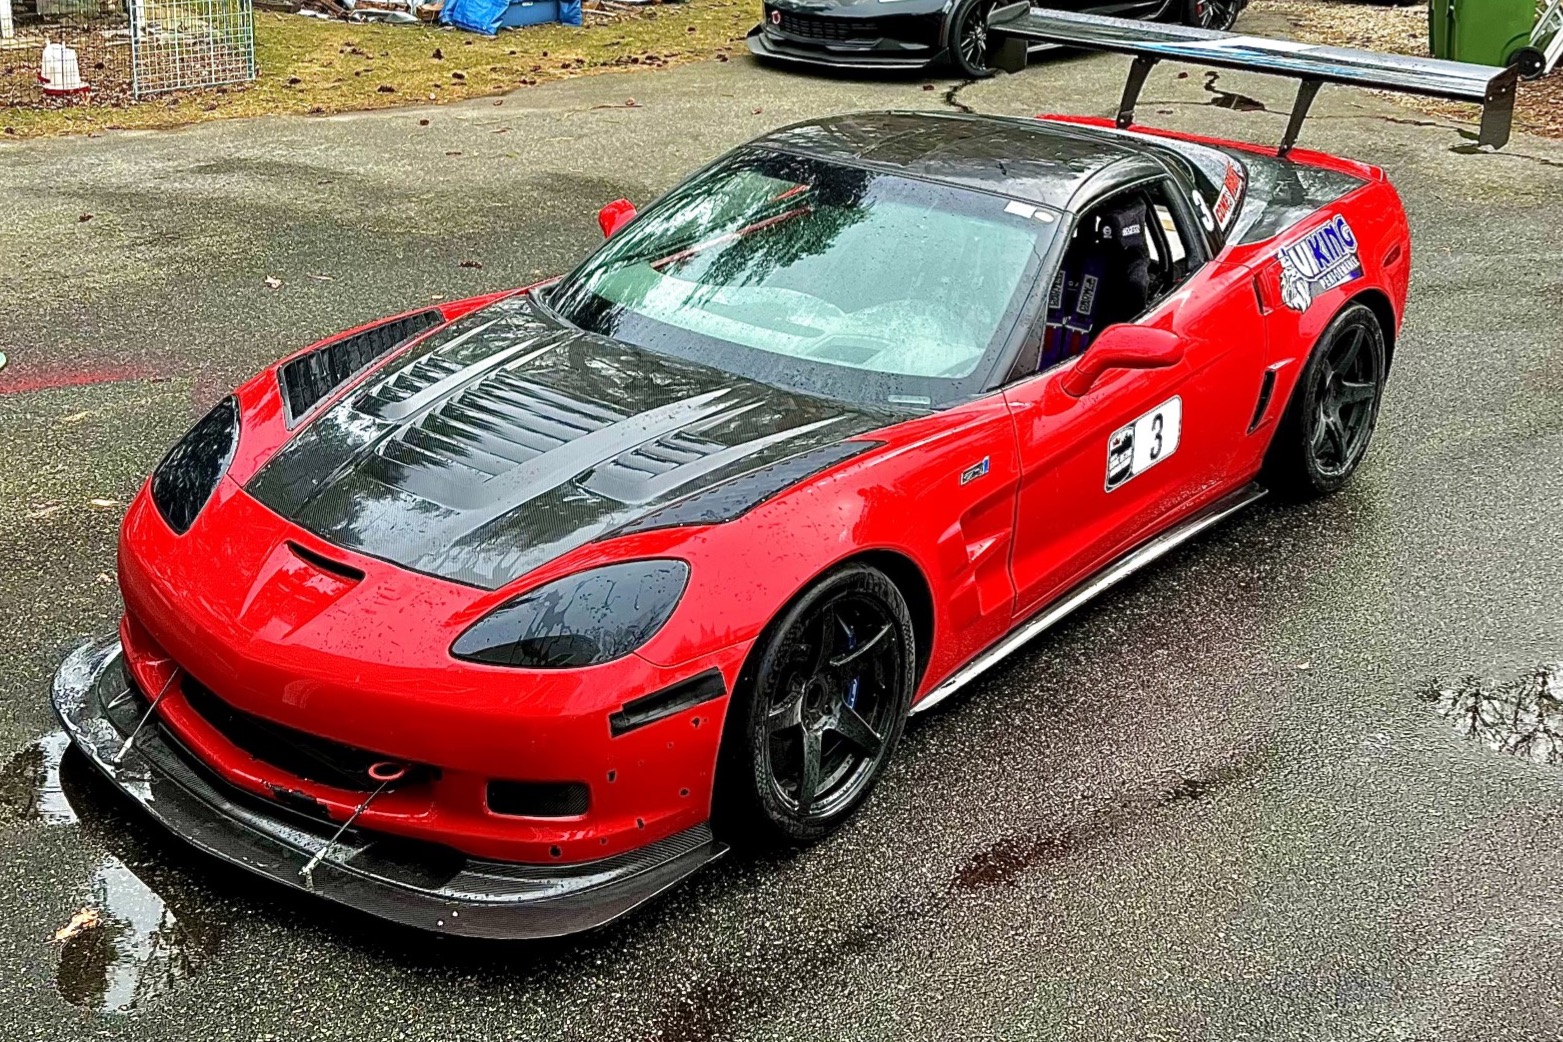 Used 468-Powered 2011 Chevrolet Corvette ZR1 Race Car Review